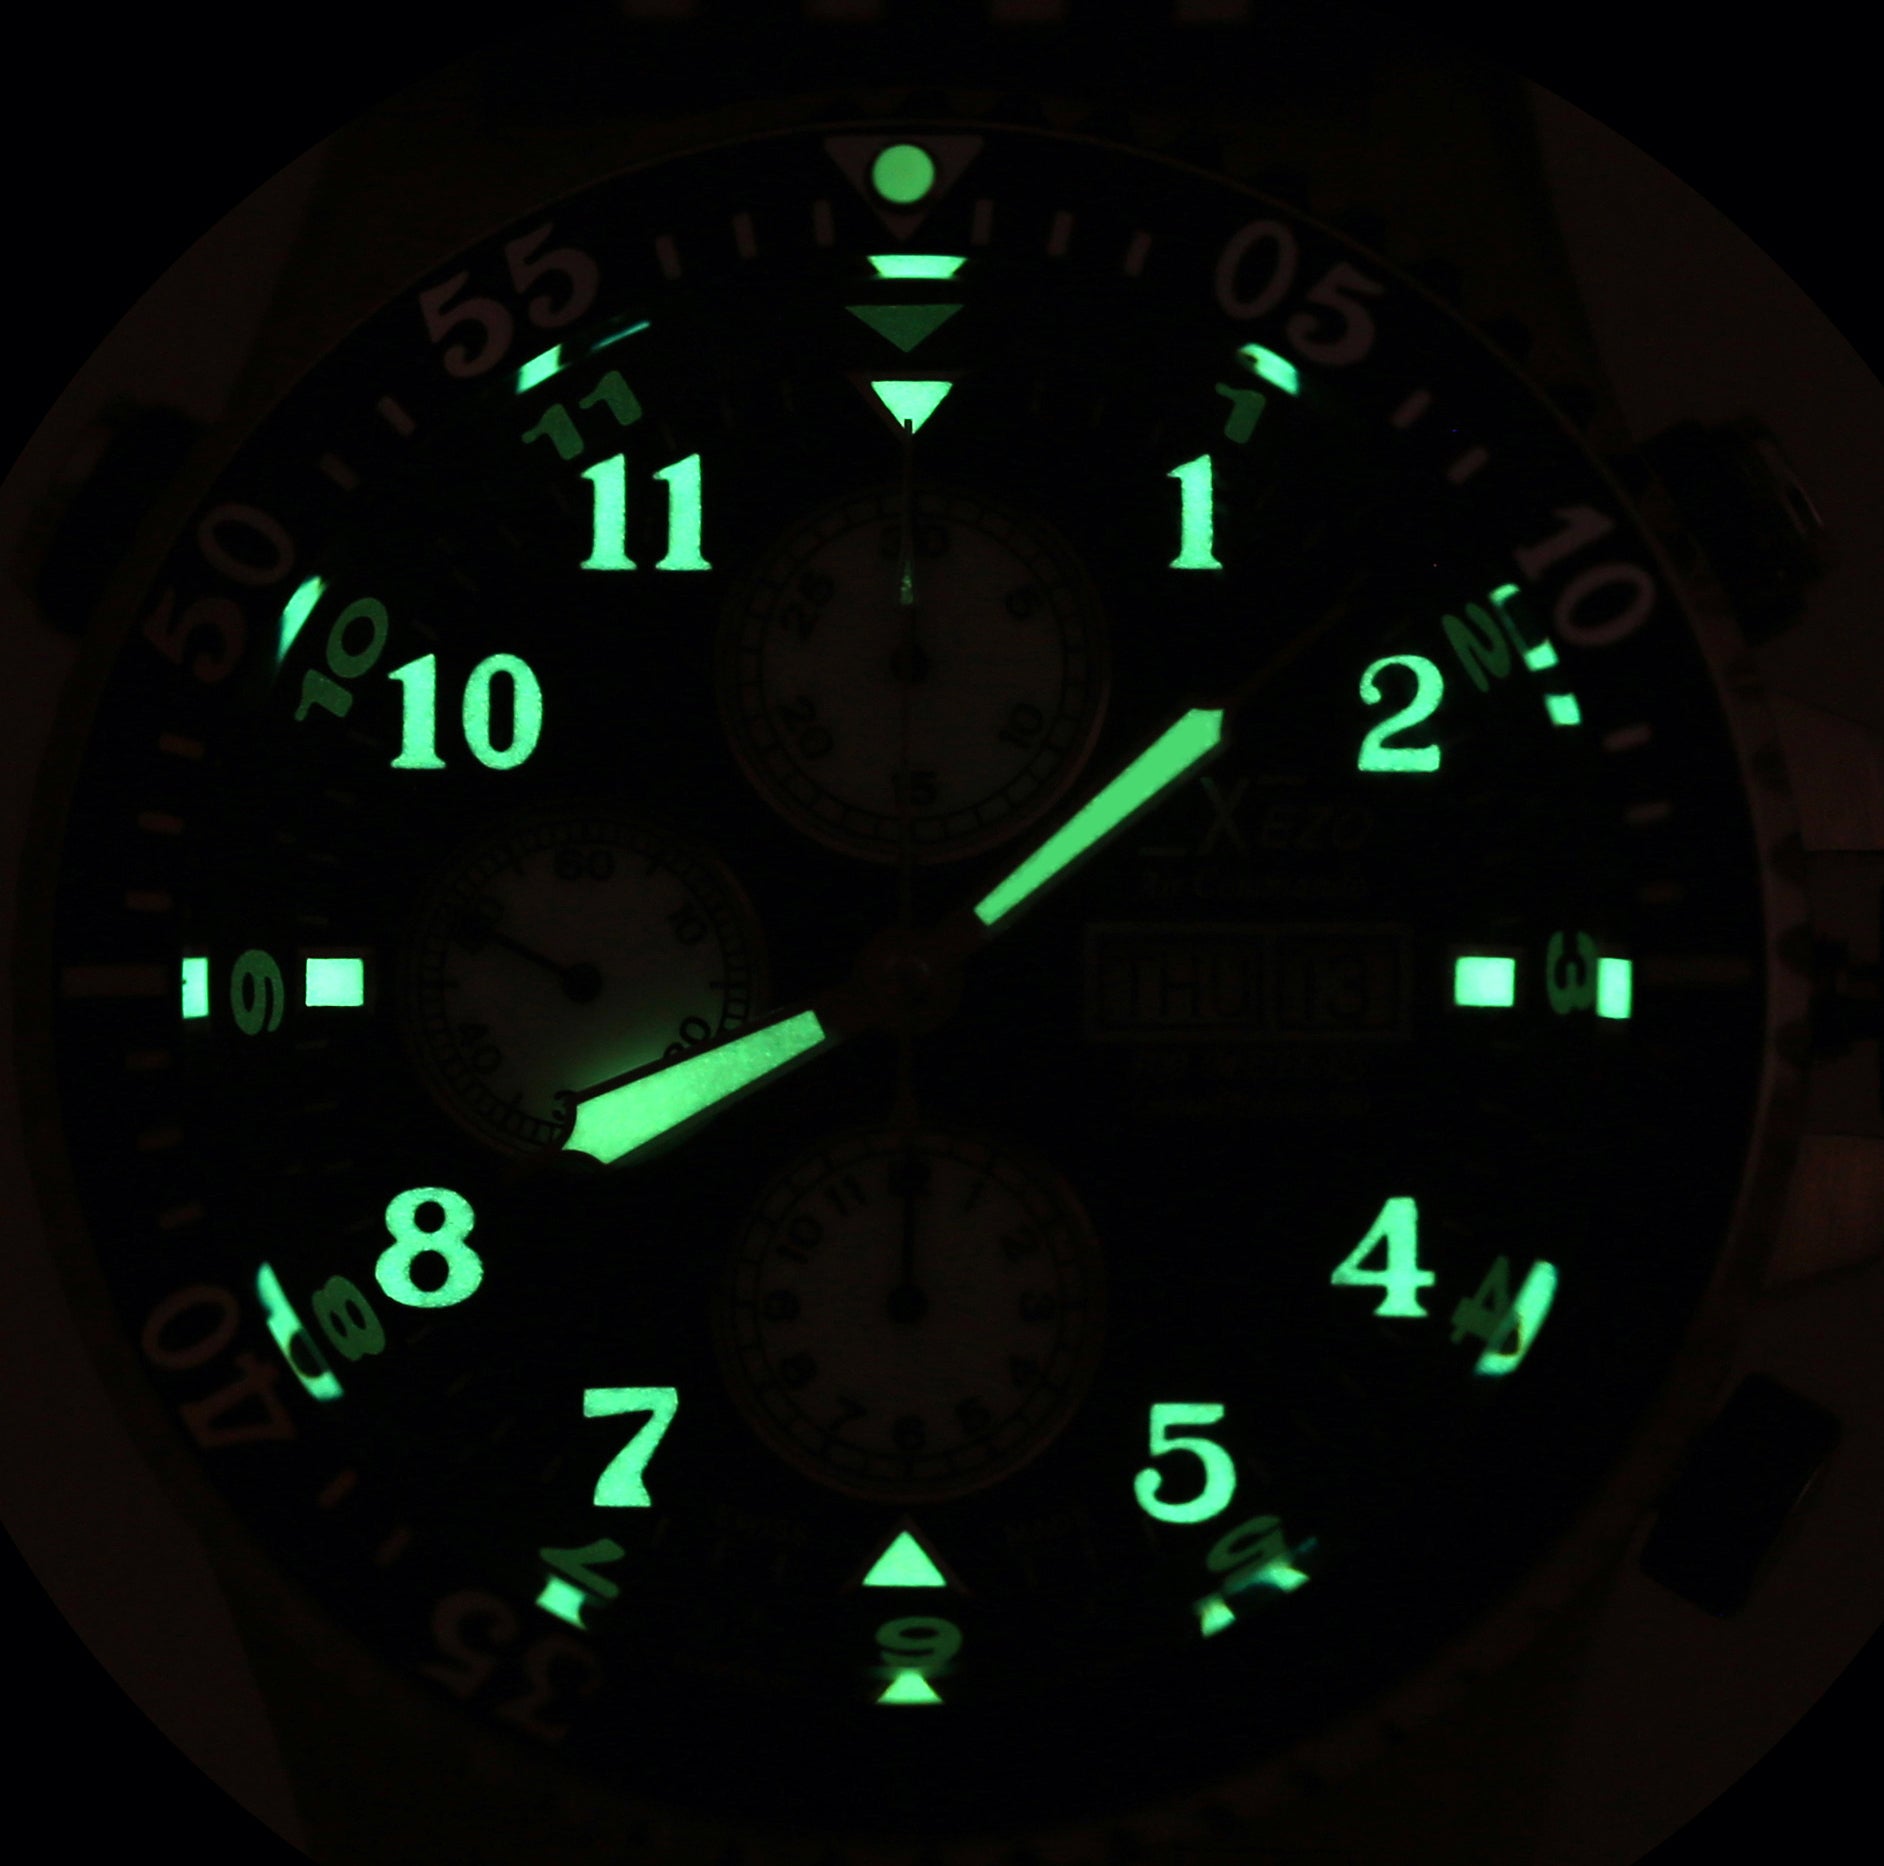 Xezo - Front view of the Air Commando D45 7750-1 watch in dark displaying the luminescent numerals